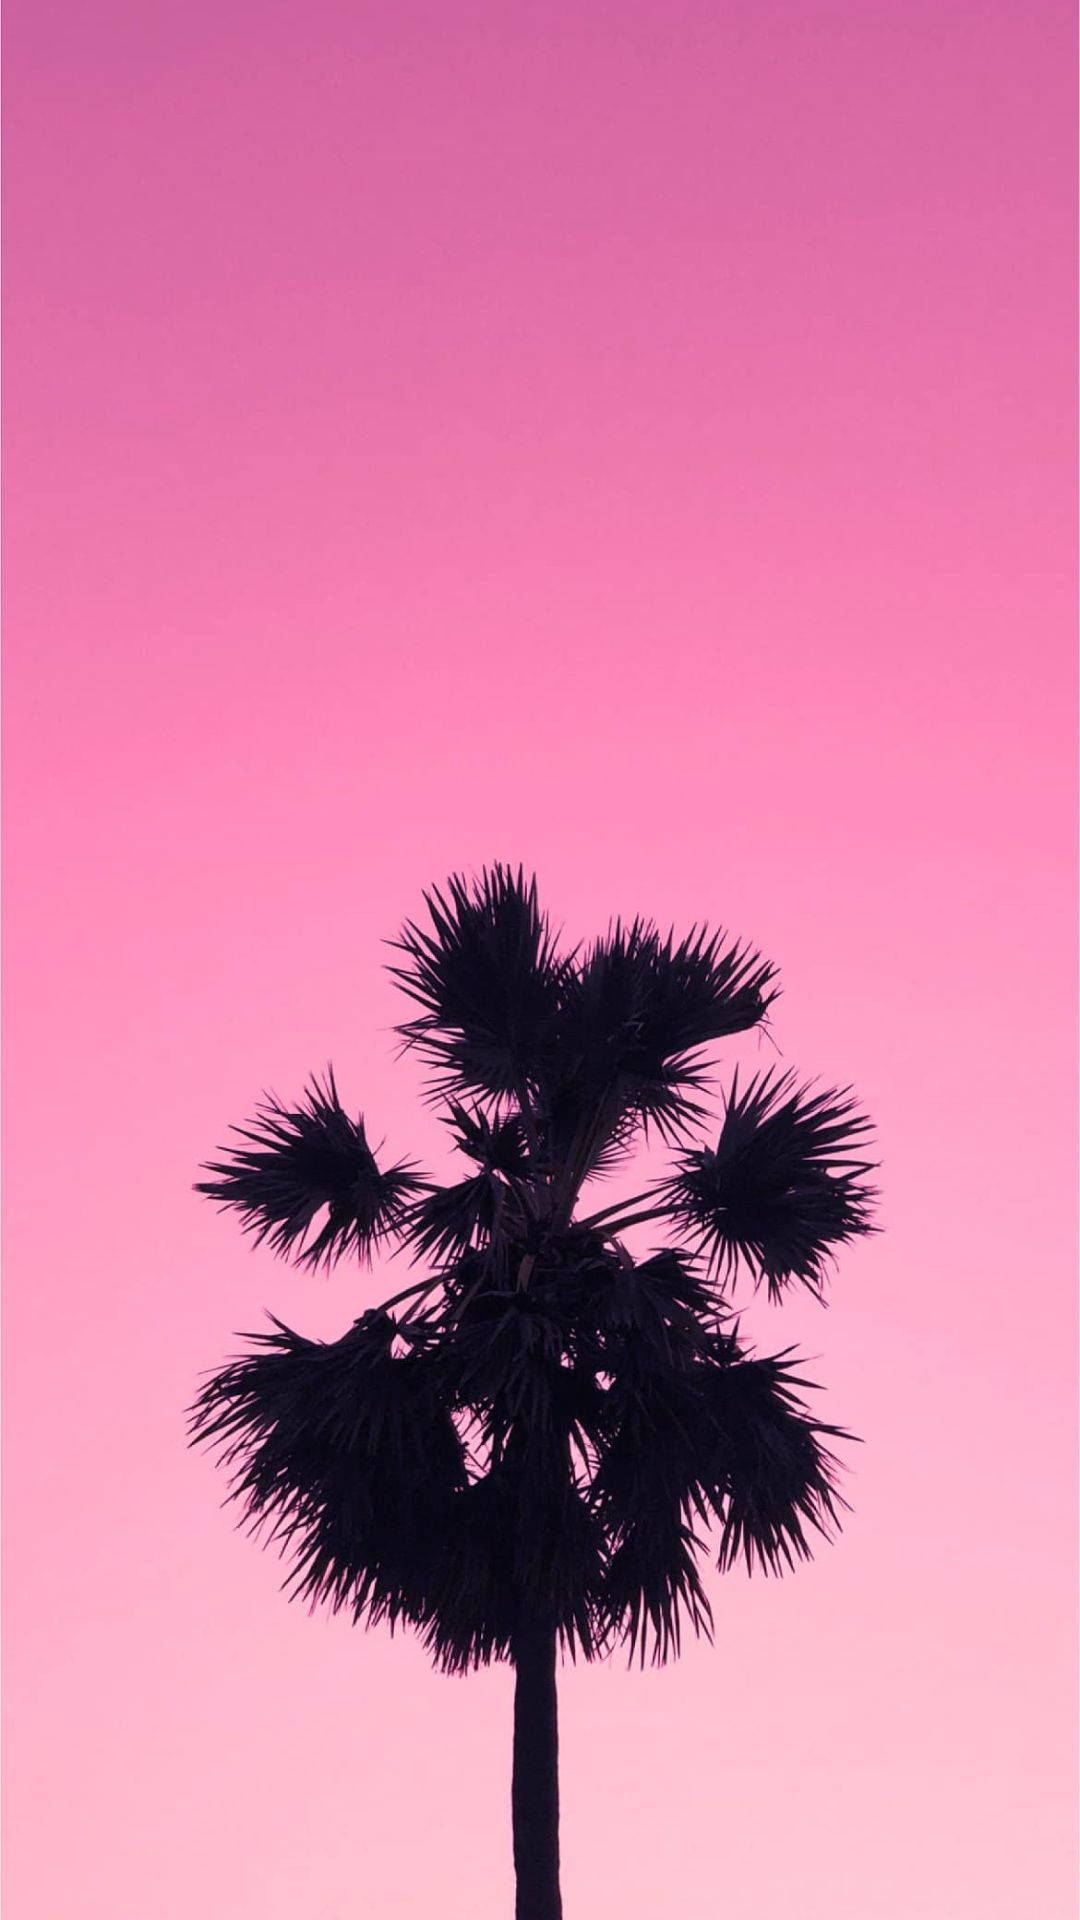 Palm Tree On Aesthetic Pink Sky Background